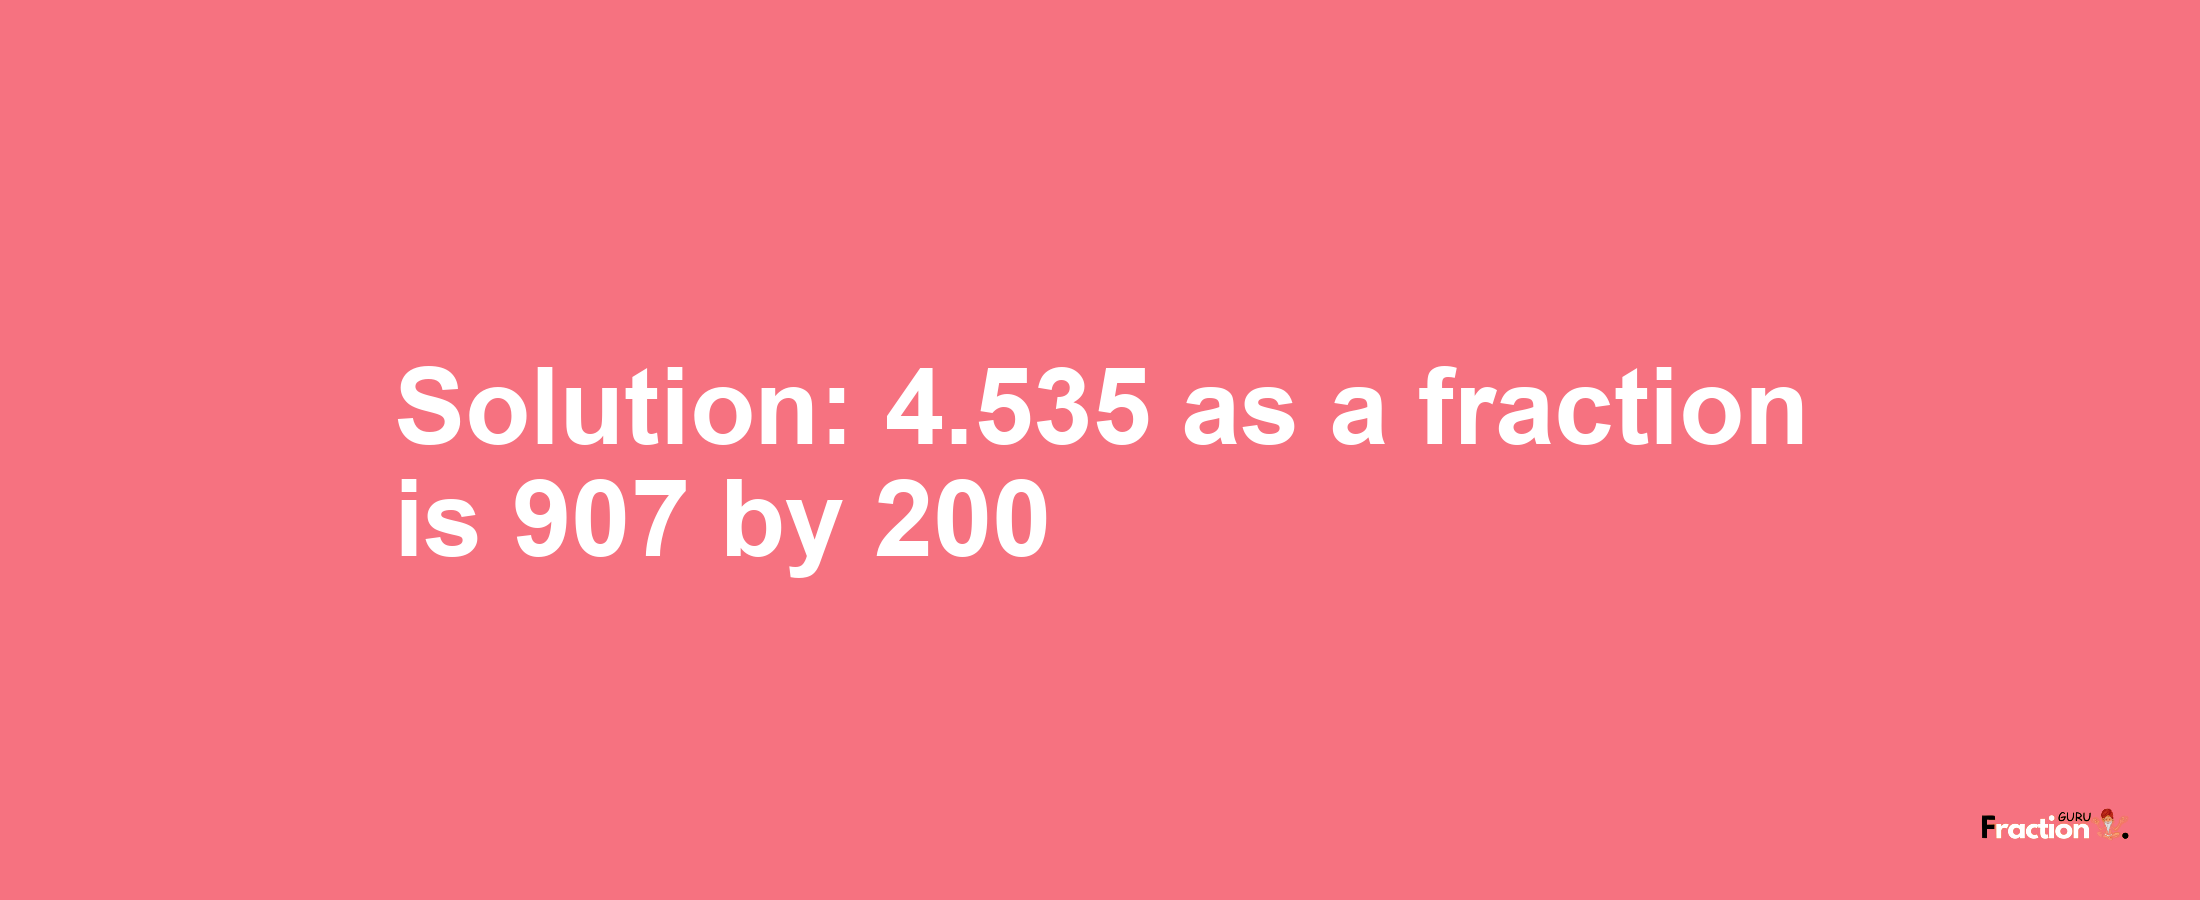 Solution:4.535 as a fraction is 907/200